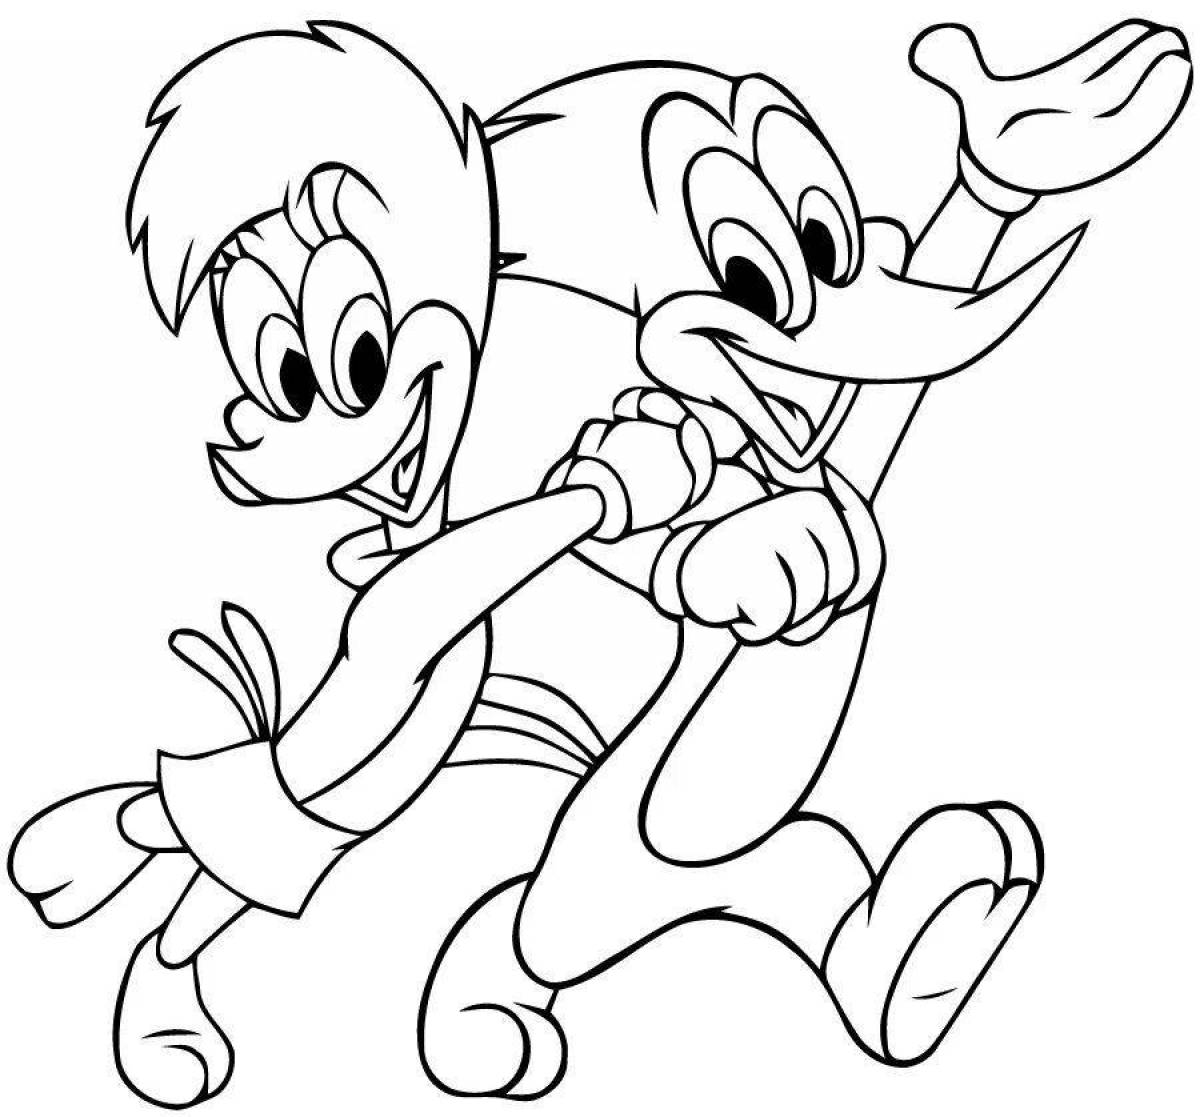 Cute cartoon character coloring page